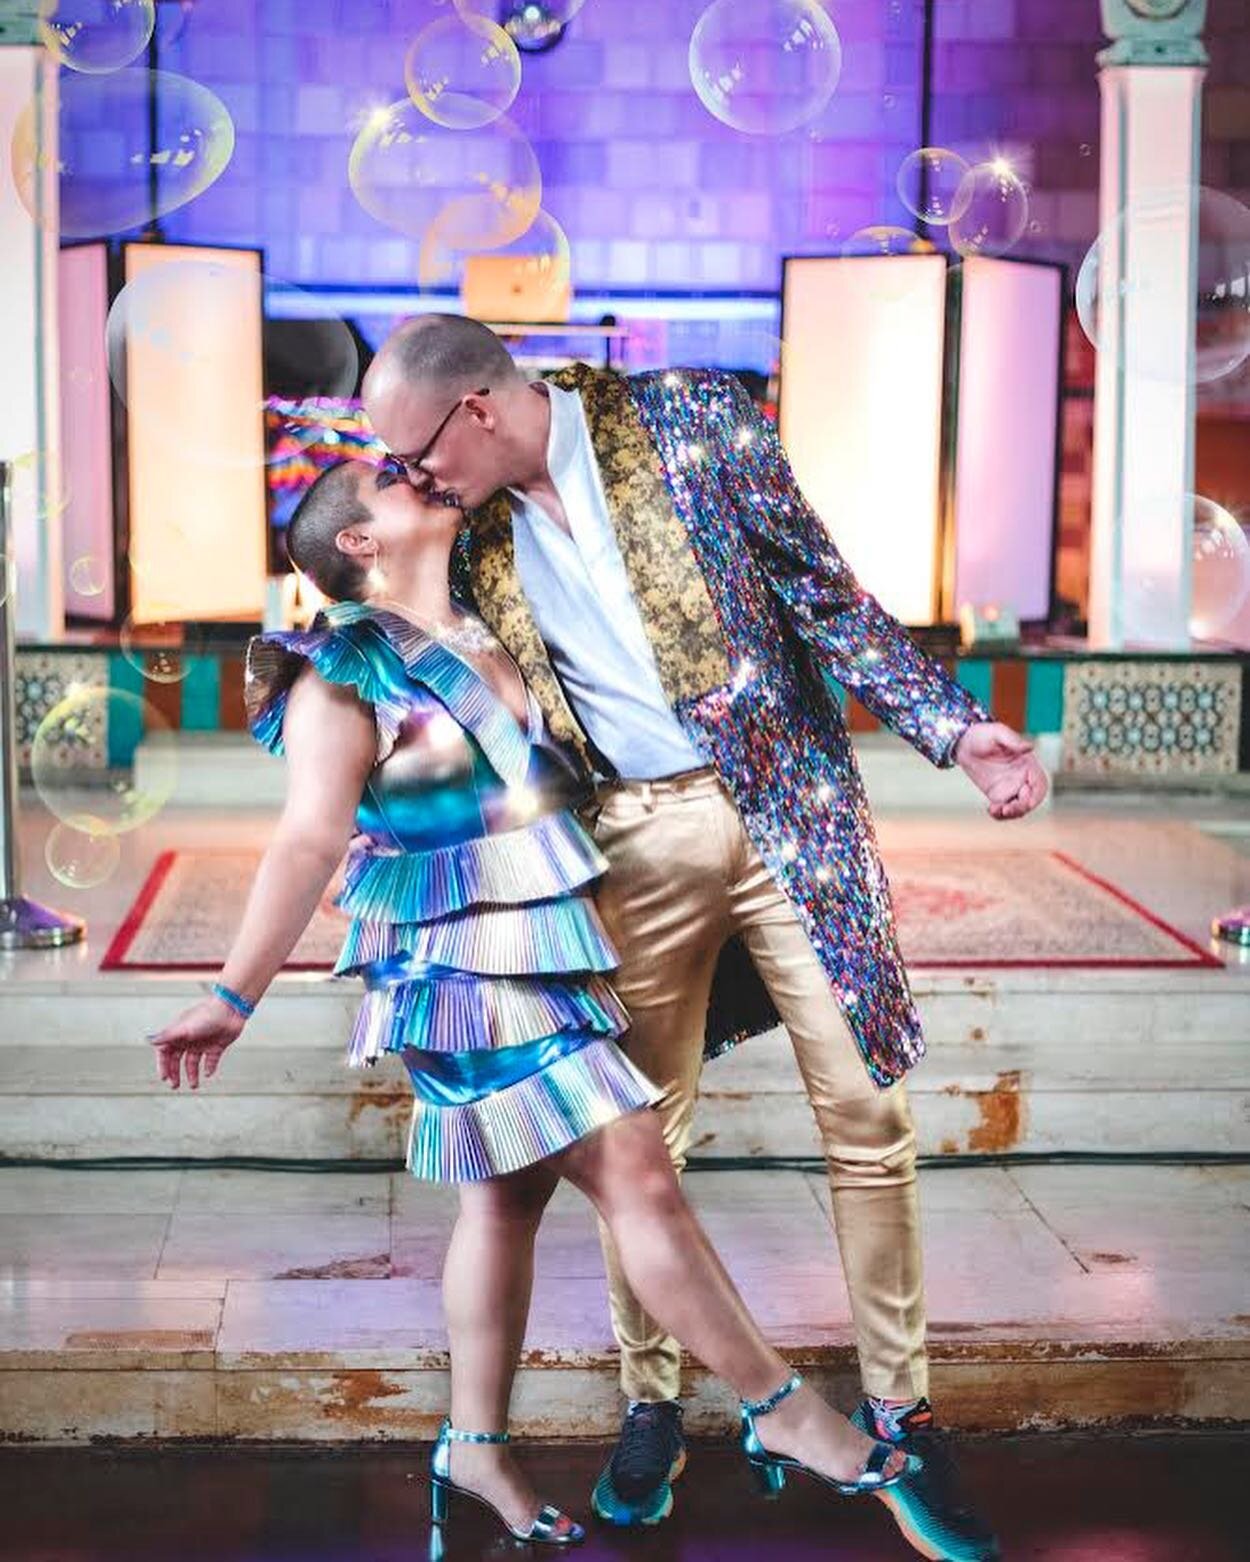 ICYMI - my big sis got married and naturally had the most colorful, confetti - ridden, sparkle disco bubblegum joy fest party ever! So glad my sis has found her match in sequin king Matt Fuller and we get to have him in our family! Equally glad that 